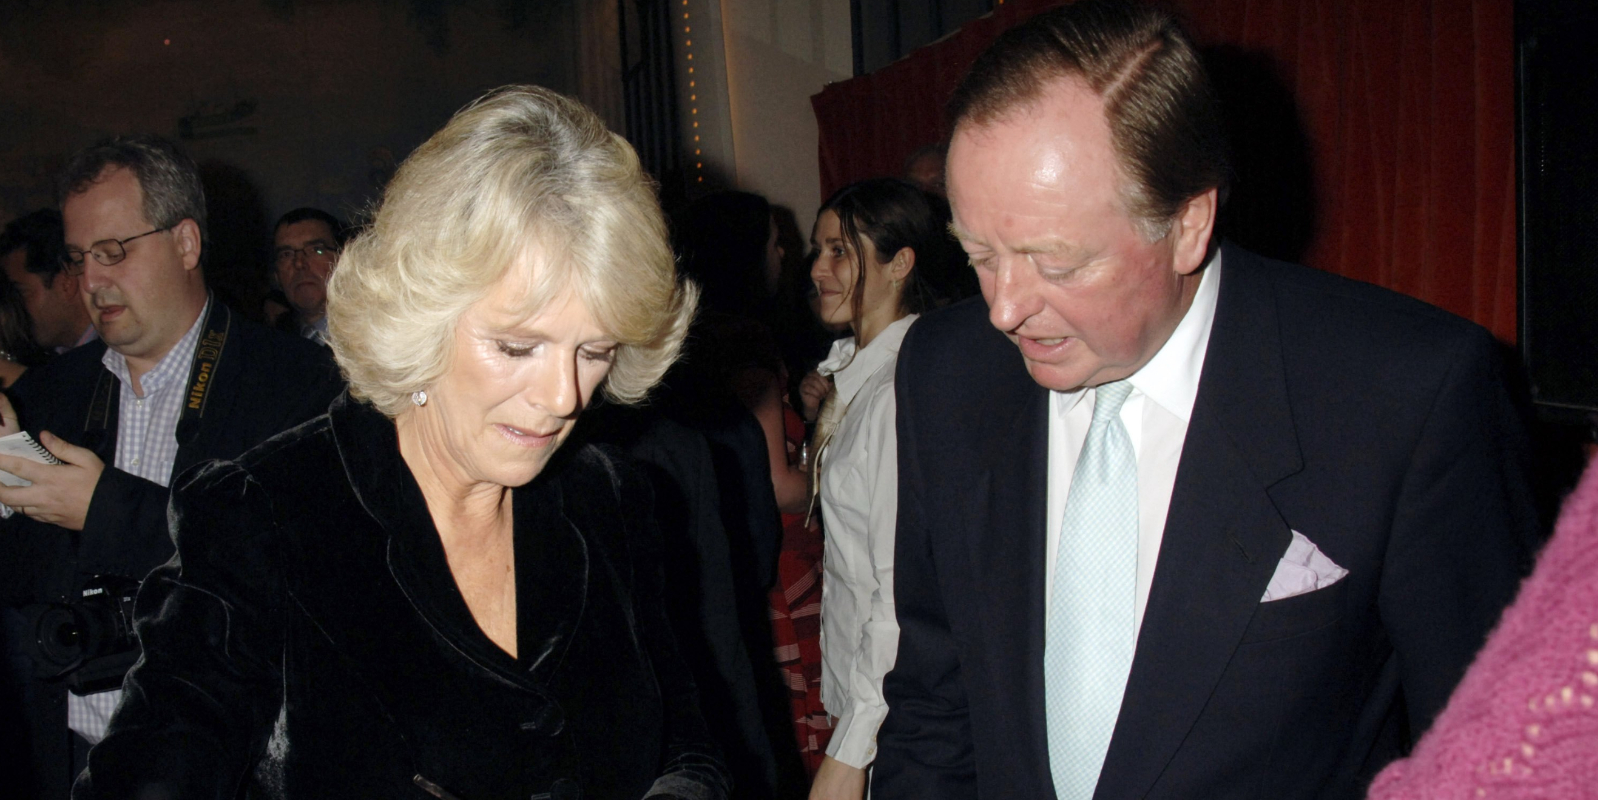 Camilla, Duchess of Cornwall and Andrew Parker Bowles attend the book launch of 'The Year Of Eating Dangerously' by Tom Parker Bowles, at Kensington Place on October 12, 2006.